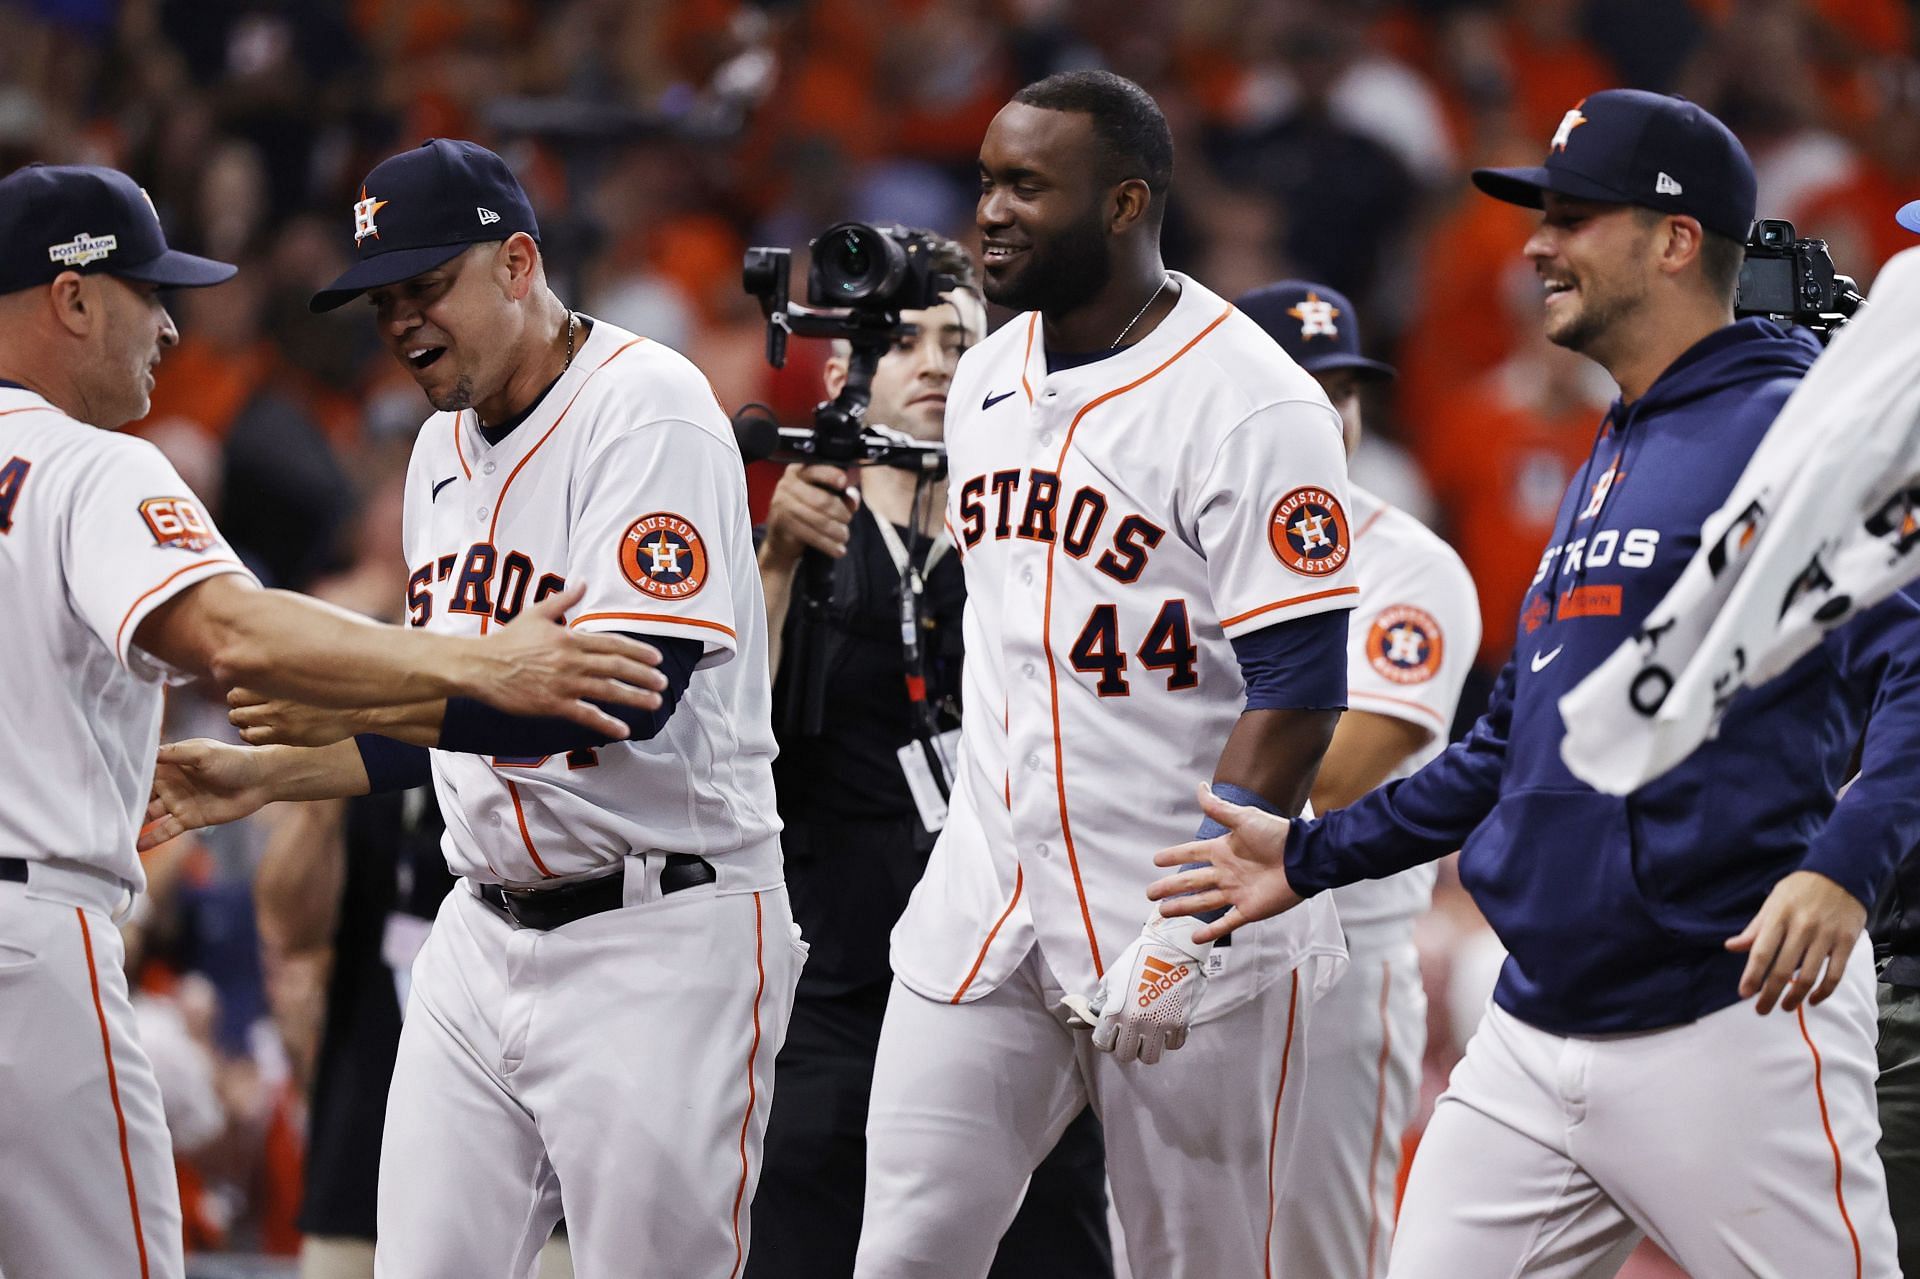 The Astros' Haters Are Running Out of Ammo - Sports Illustrated